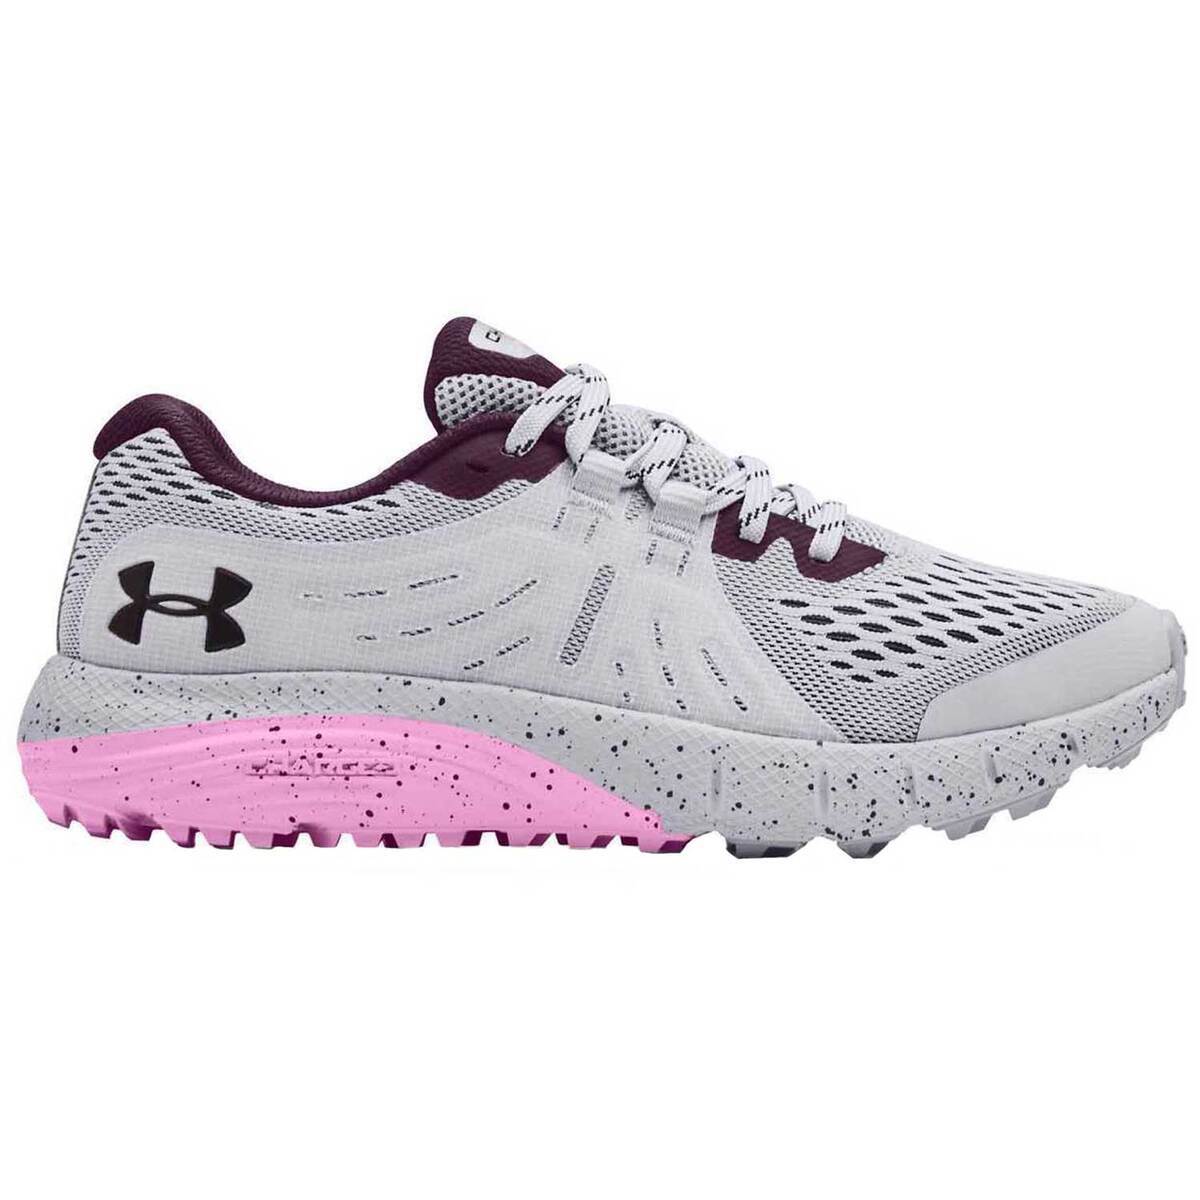 Under Armour Women's Charged Bandit Trail Running Shoes | Sportsman's ...